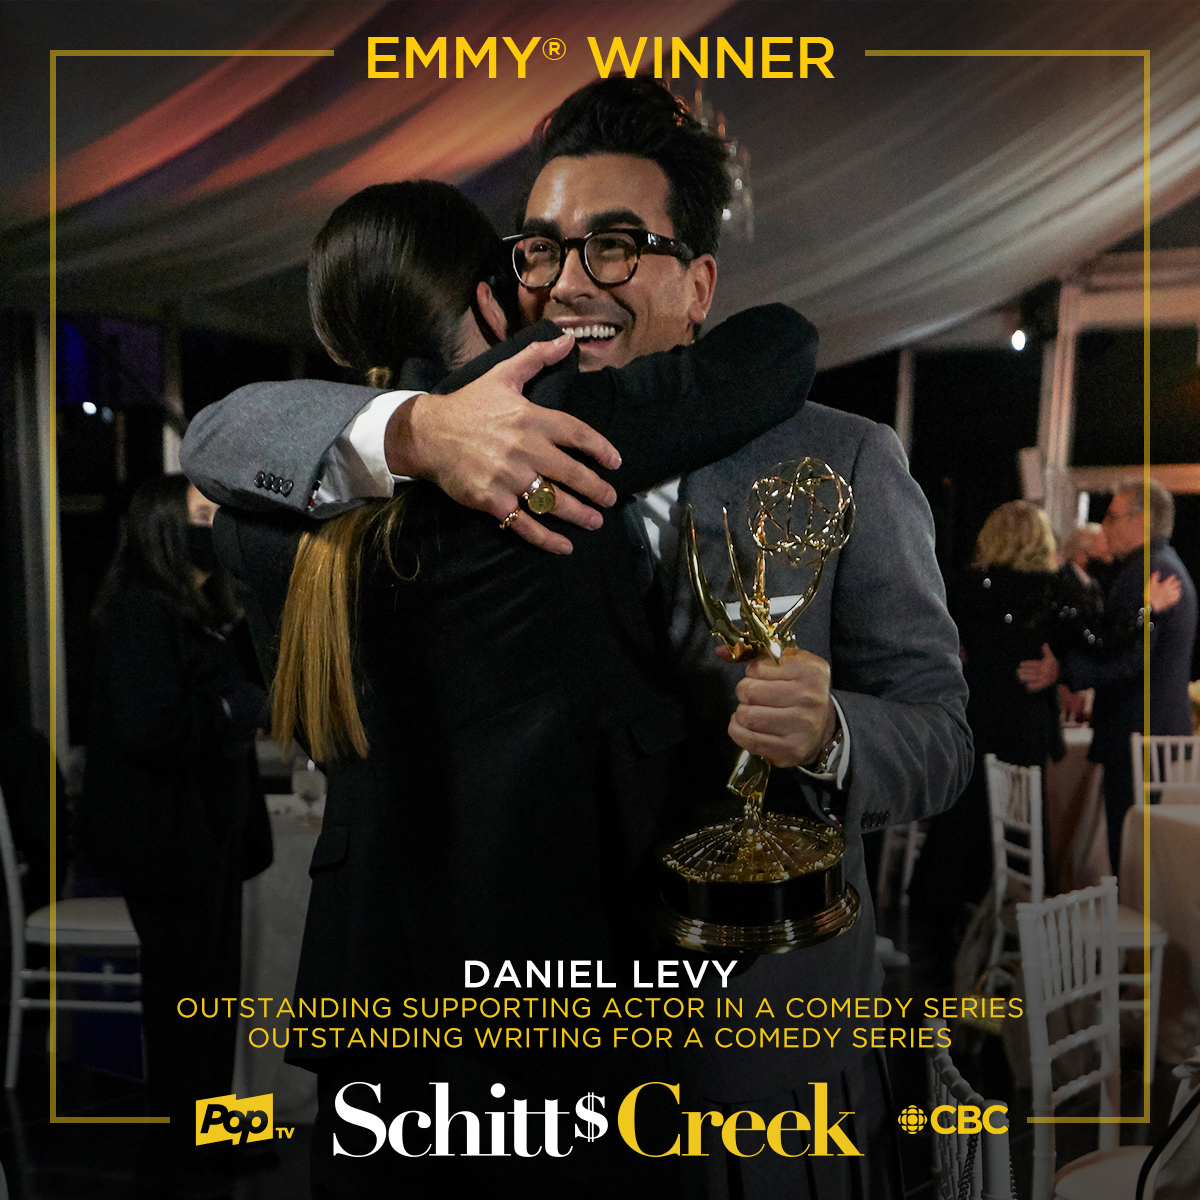 And official congratulations to you, Dan!  #Emmys  